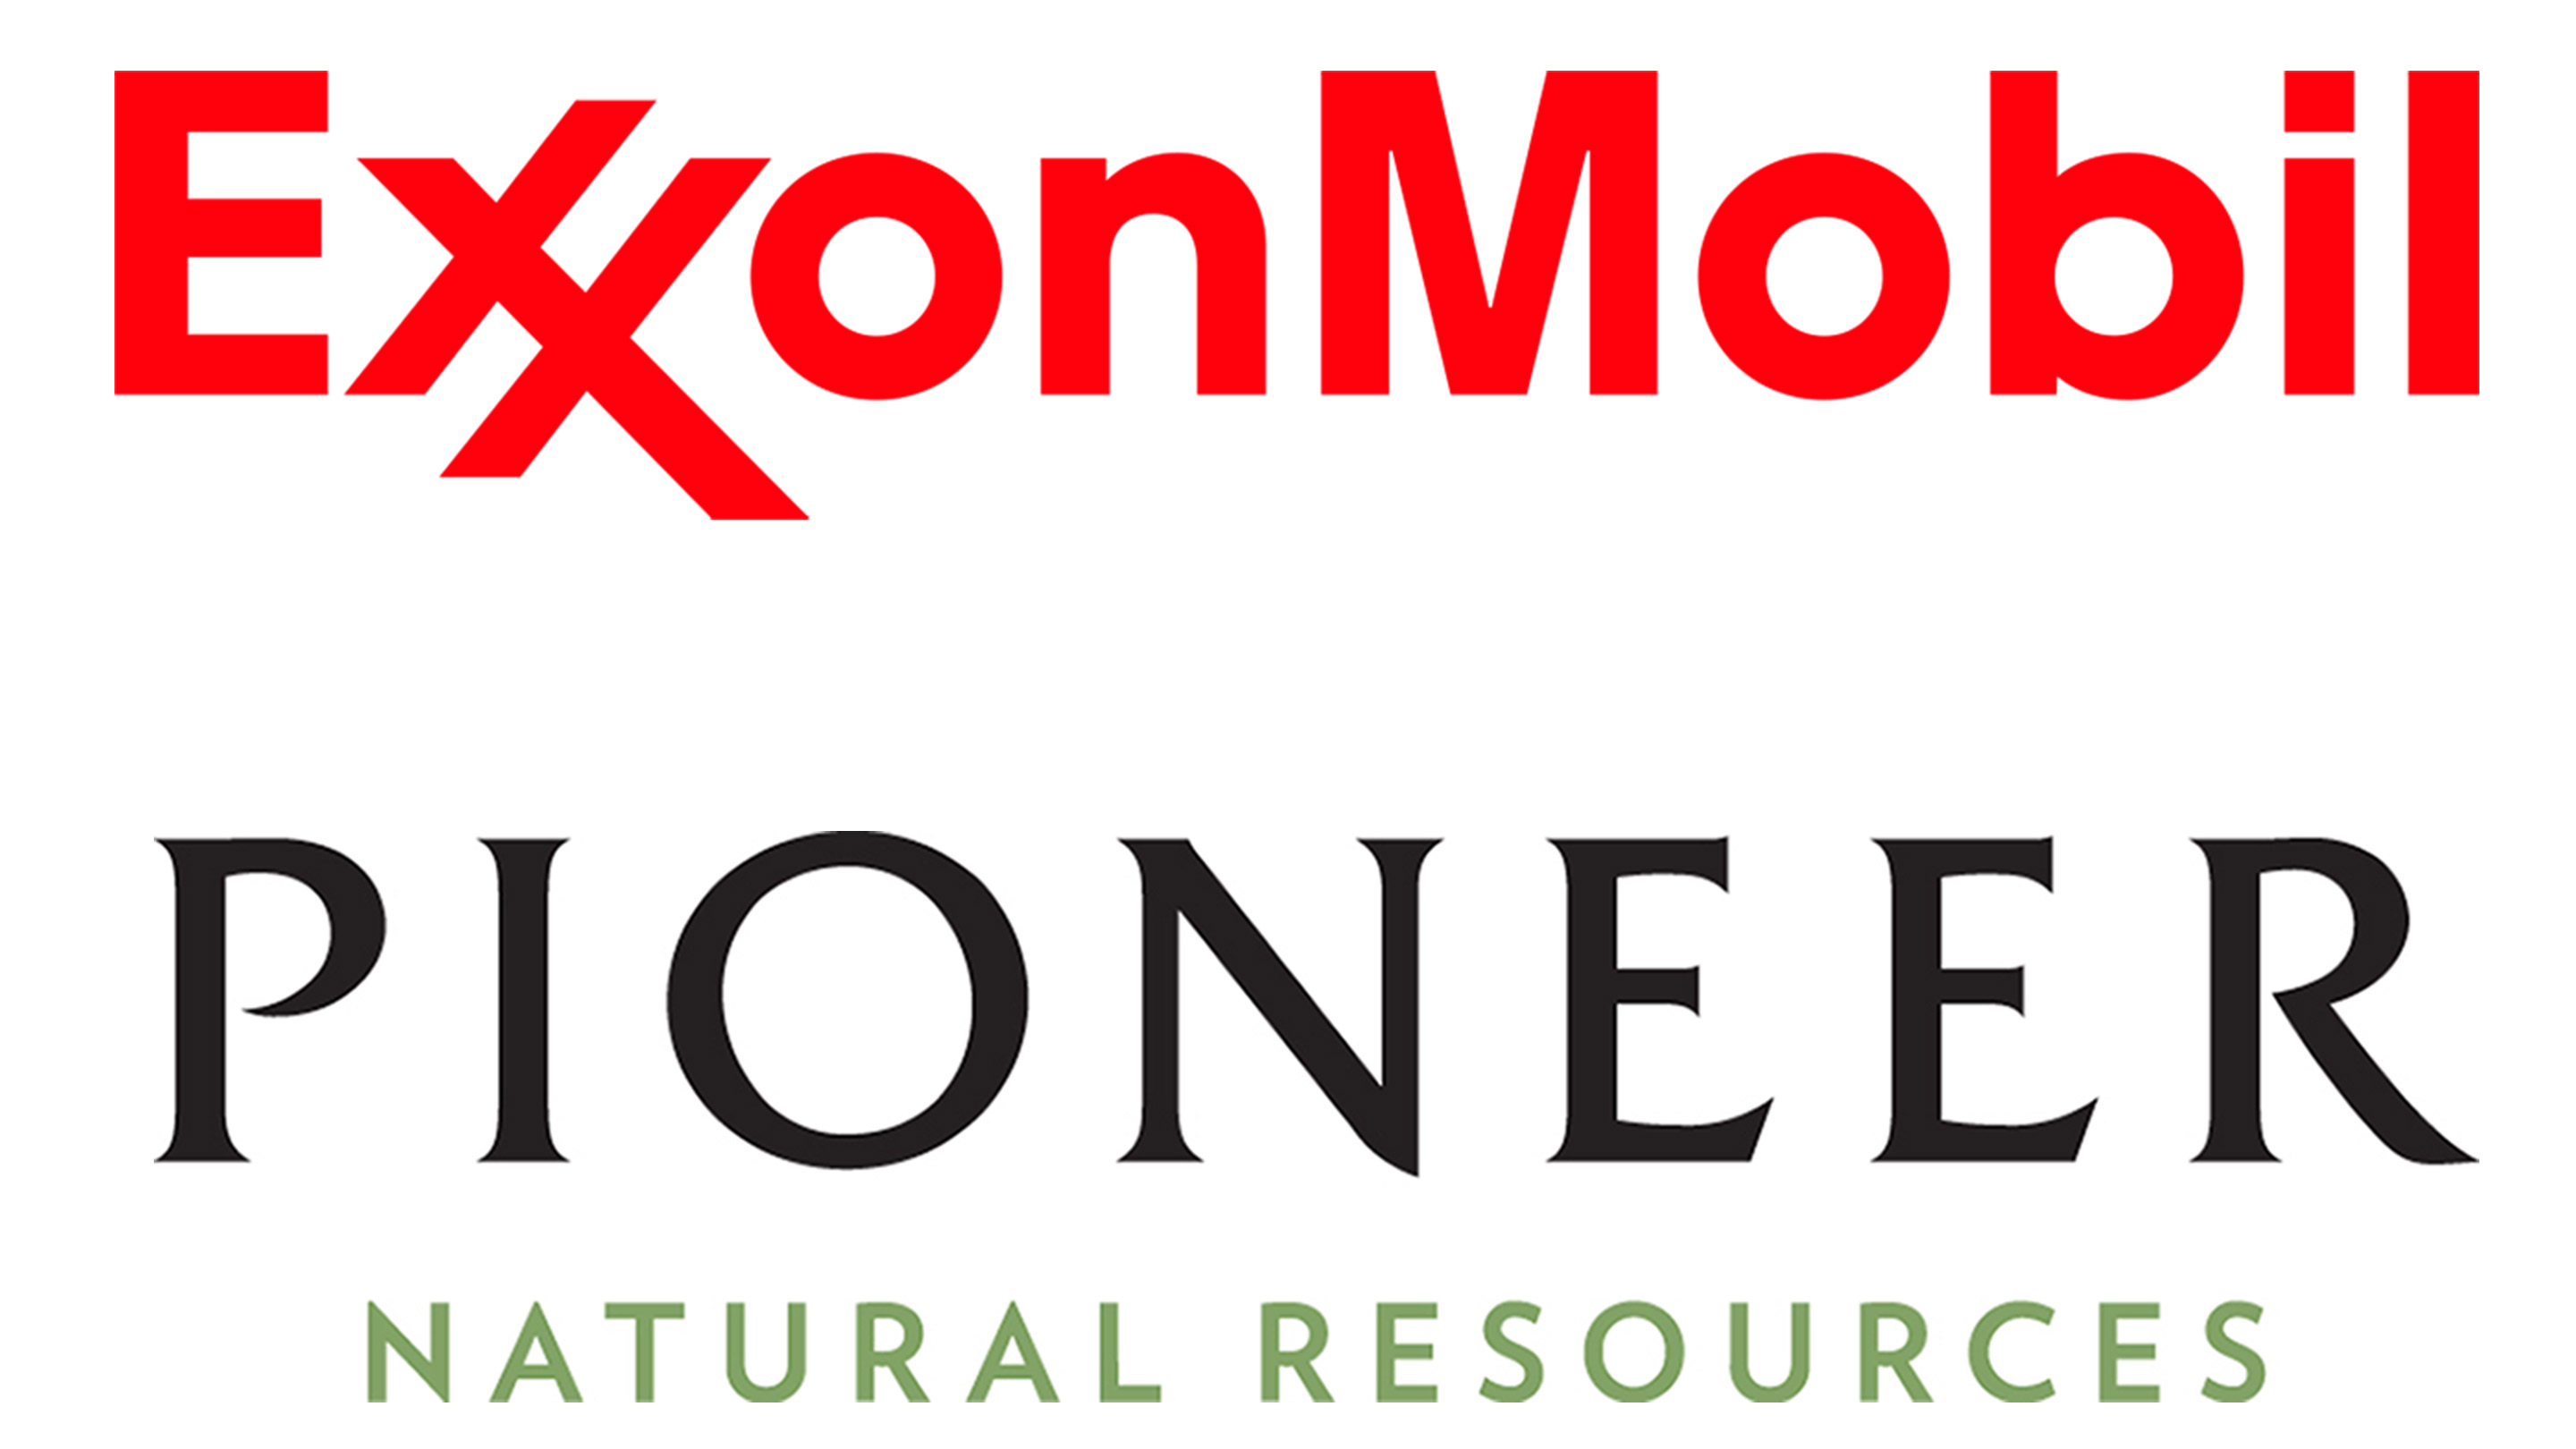 ExxonMobil announces merger with Pioneer Natural Resources in an